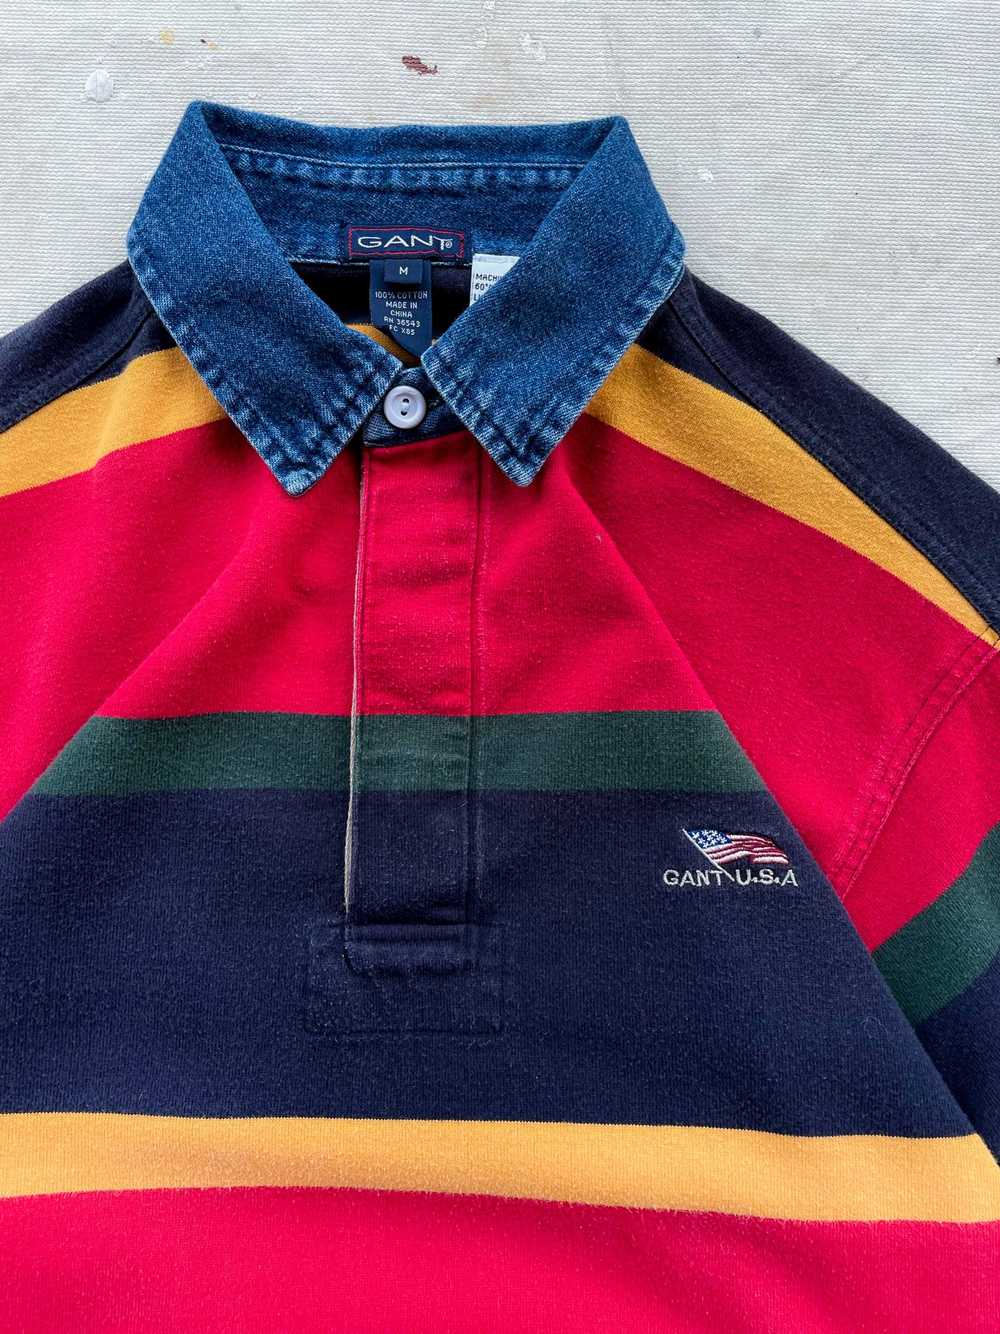 90's Gant Rugby Shirt—[M] - image 2